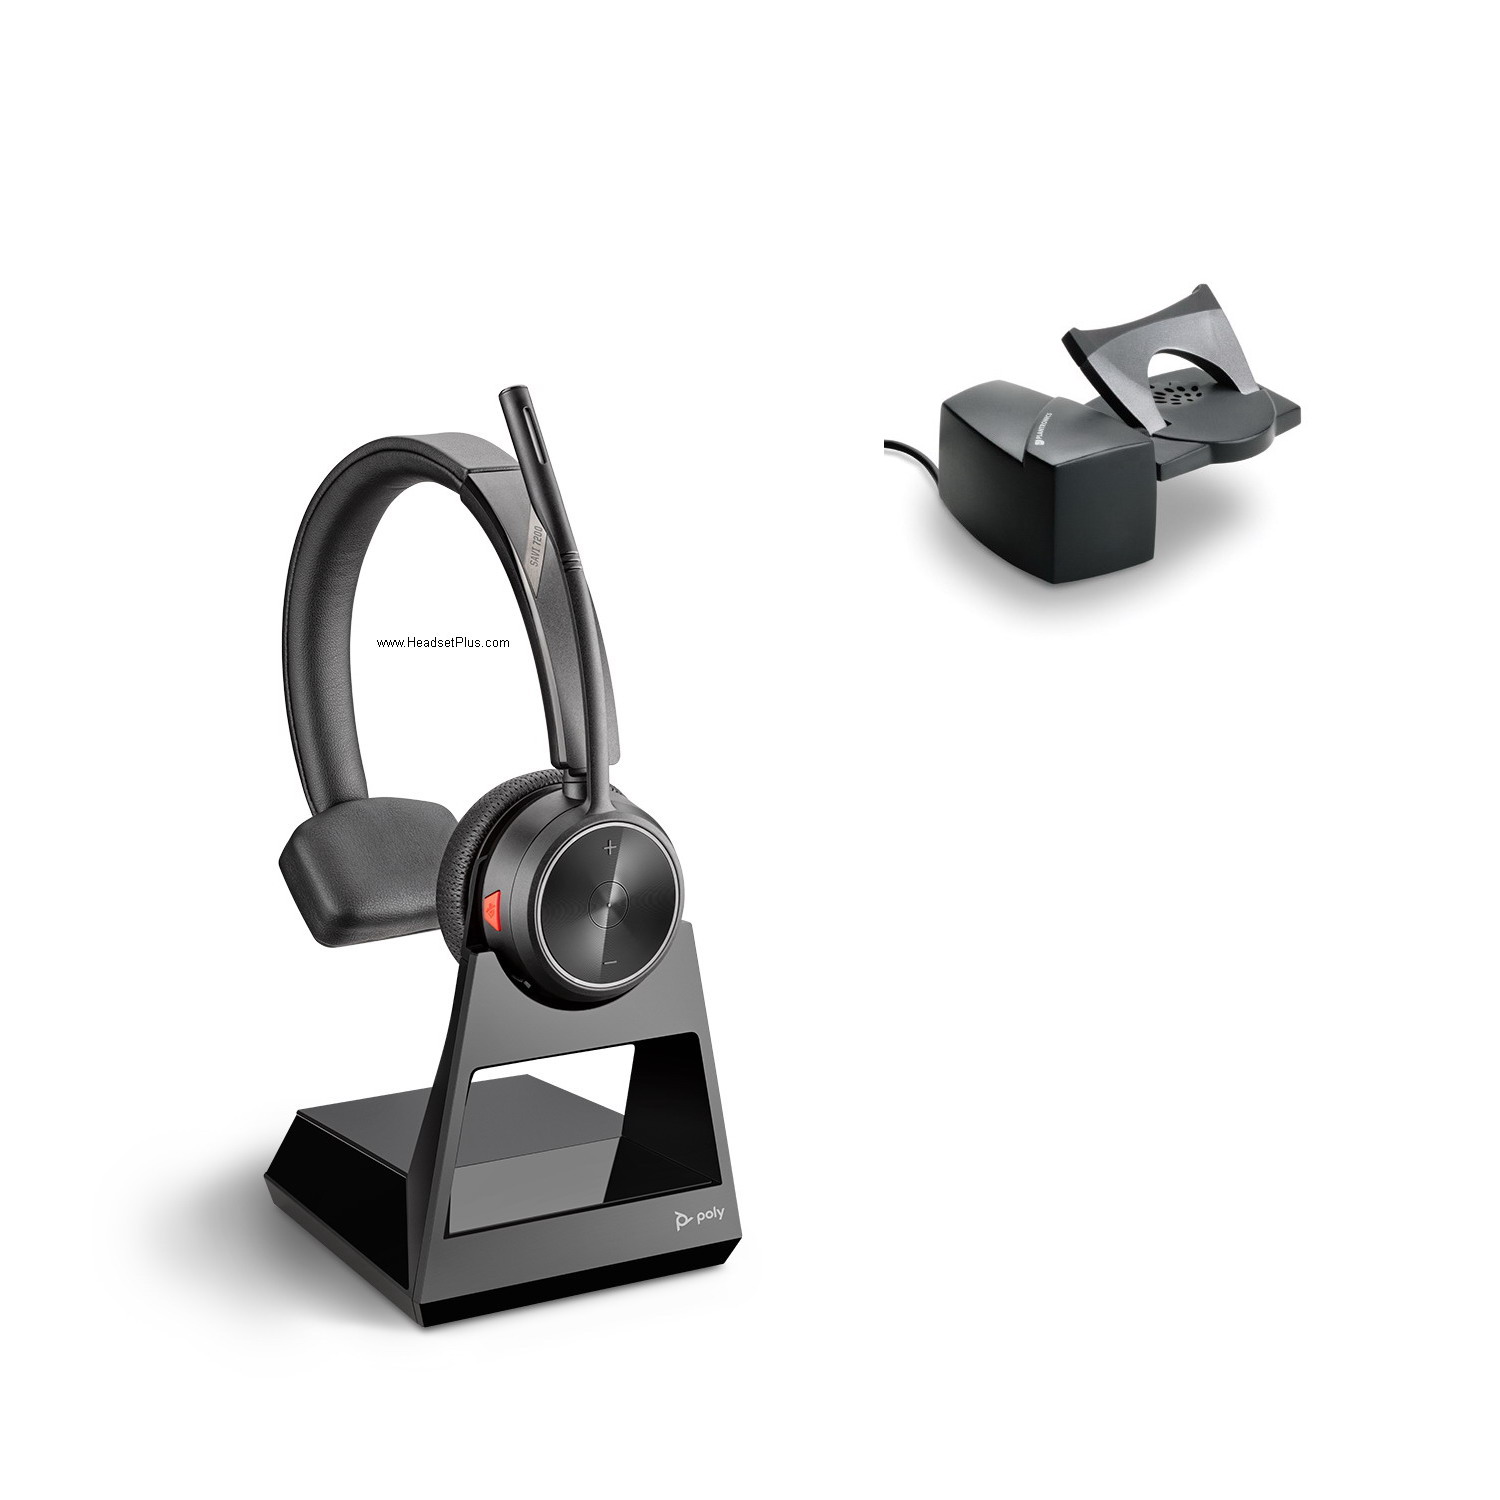 poly savi 7210+hl10 wireless headset combo package view